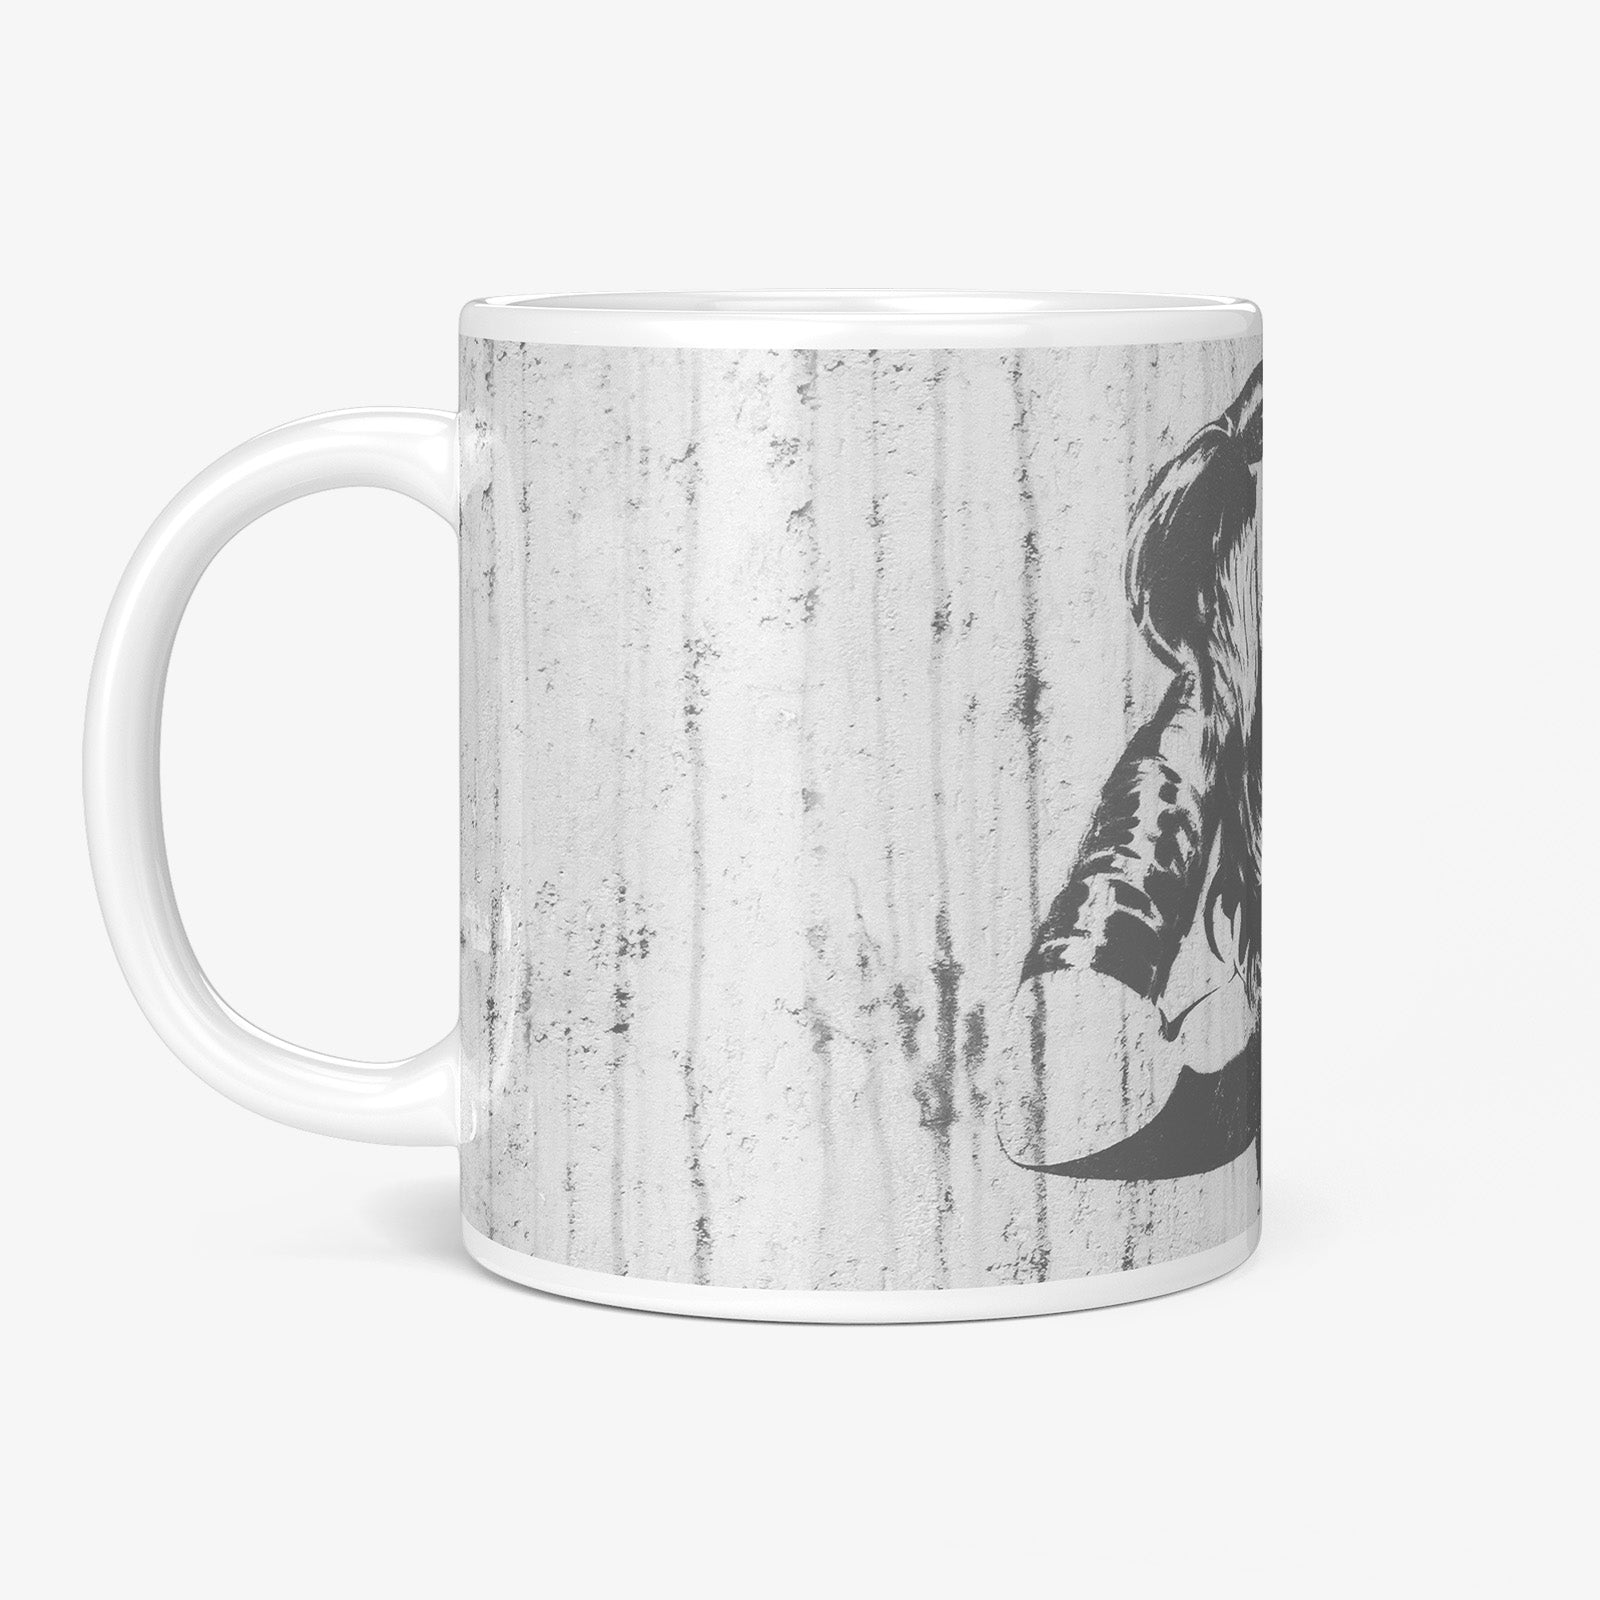 Be inspired by our Urban Art Coffee Mug "Street Girl" from Hamburg. This mug features an 11oz size with the handle on the left.